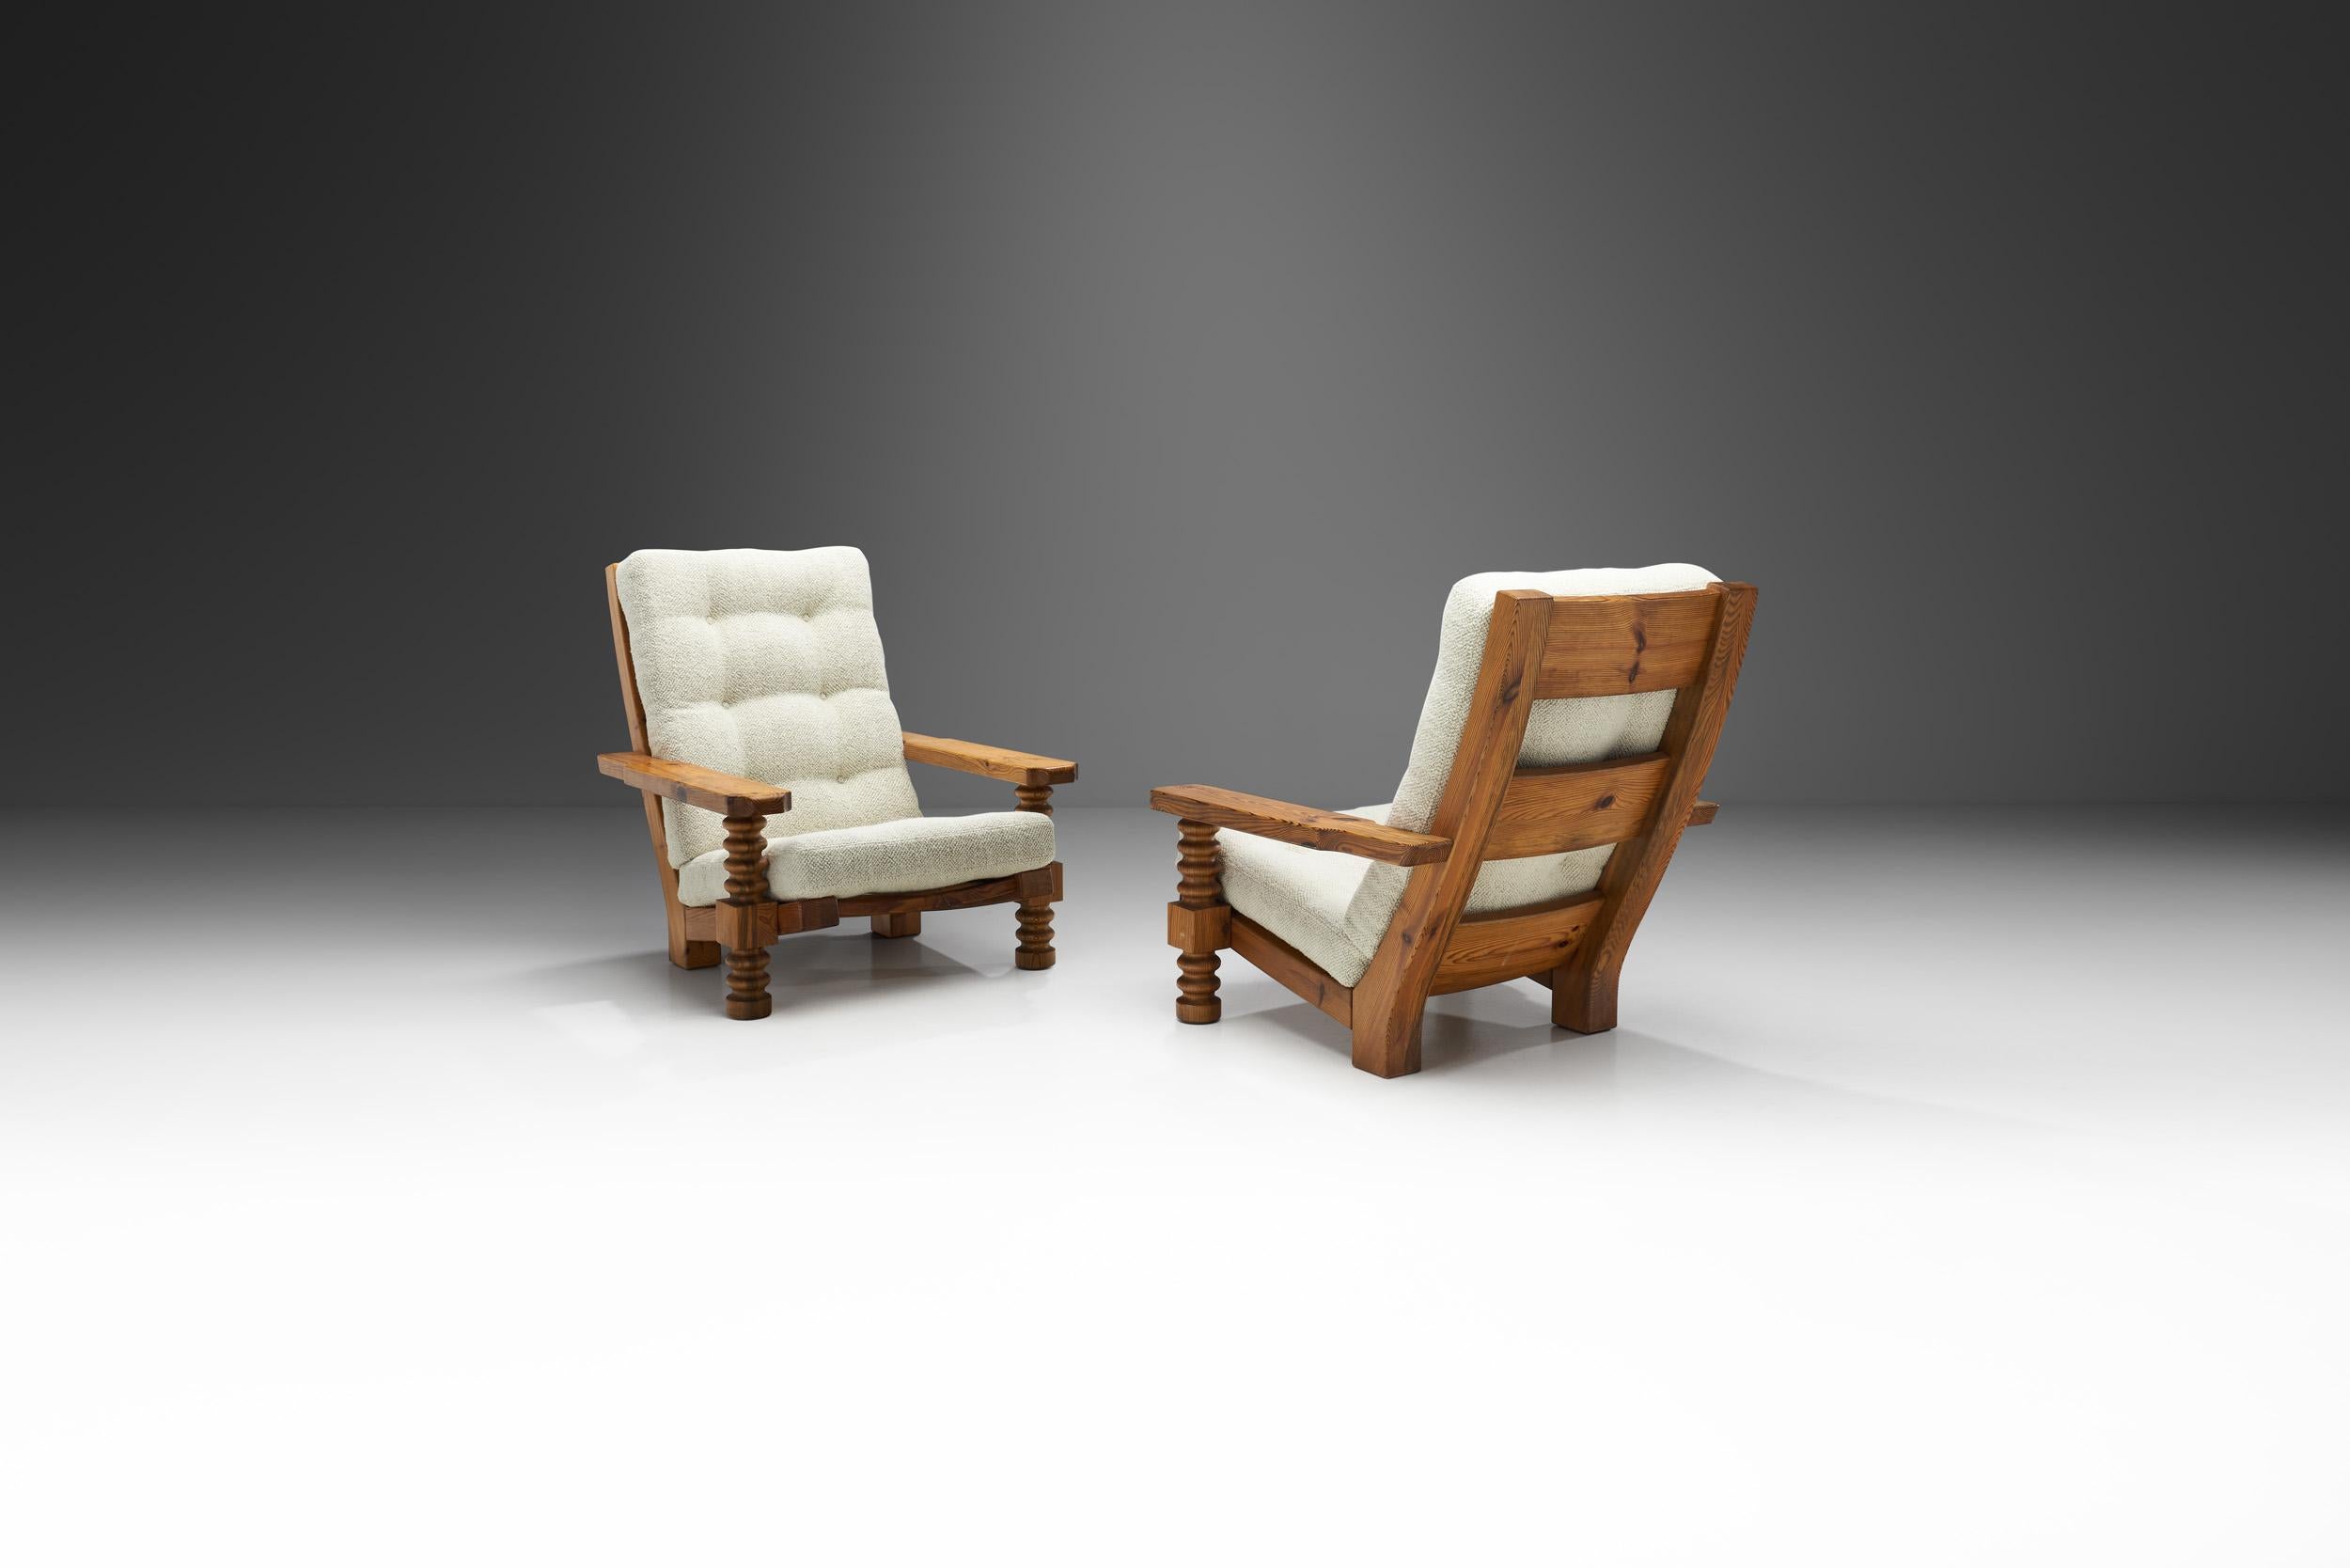 Scandinavian Modern Swedish Pine Armchairs with Sculpted Legs, Sweden, 1960s For Sale